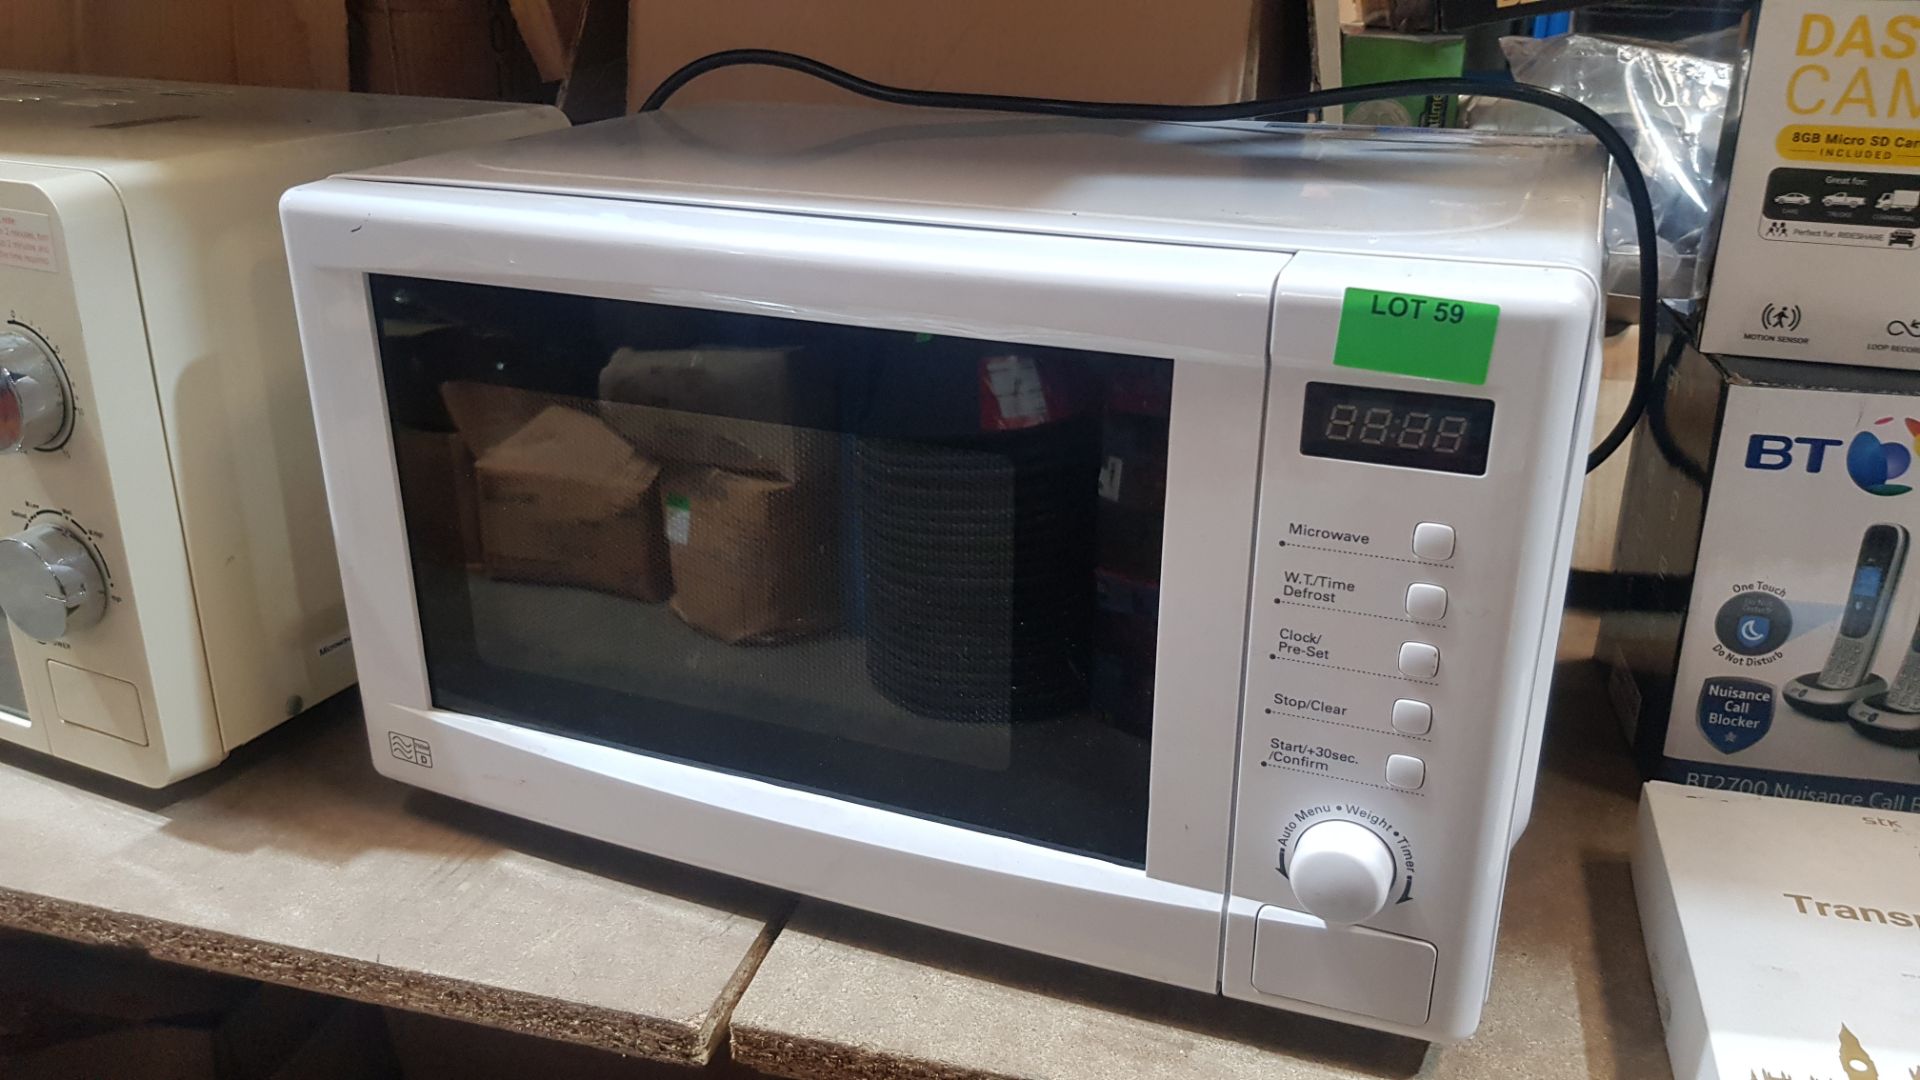 (R6E) Kitchen. 1 X 700W Microwave Oven White (Model GDM301W-16) (Clean, Appears New) - Image 3 of 3